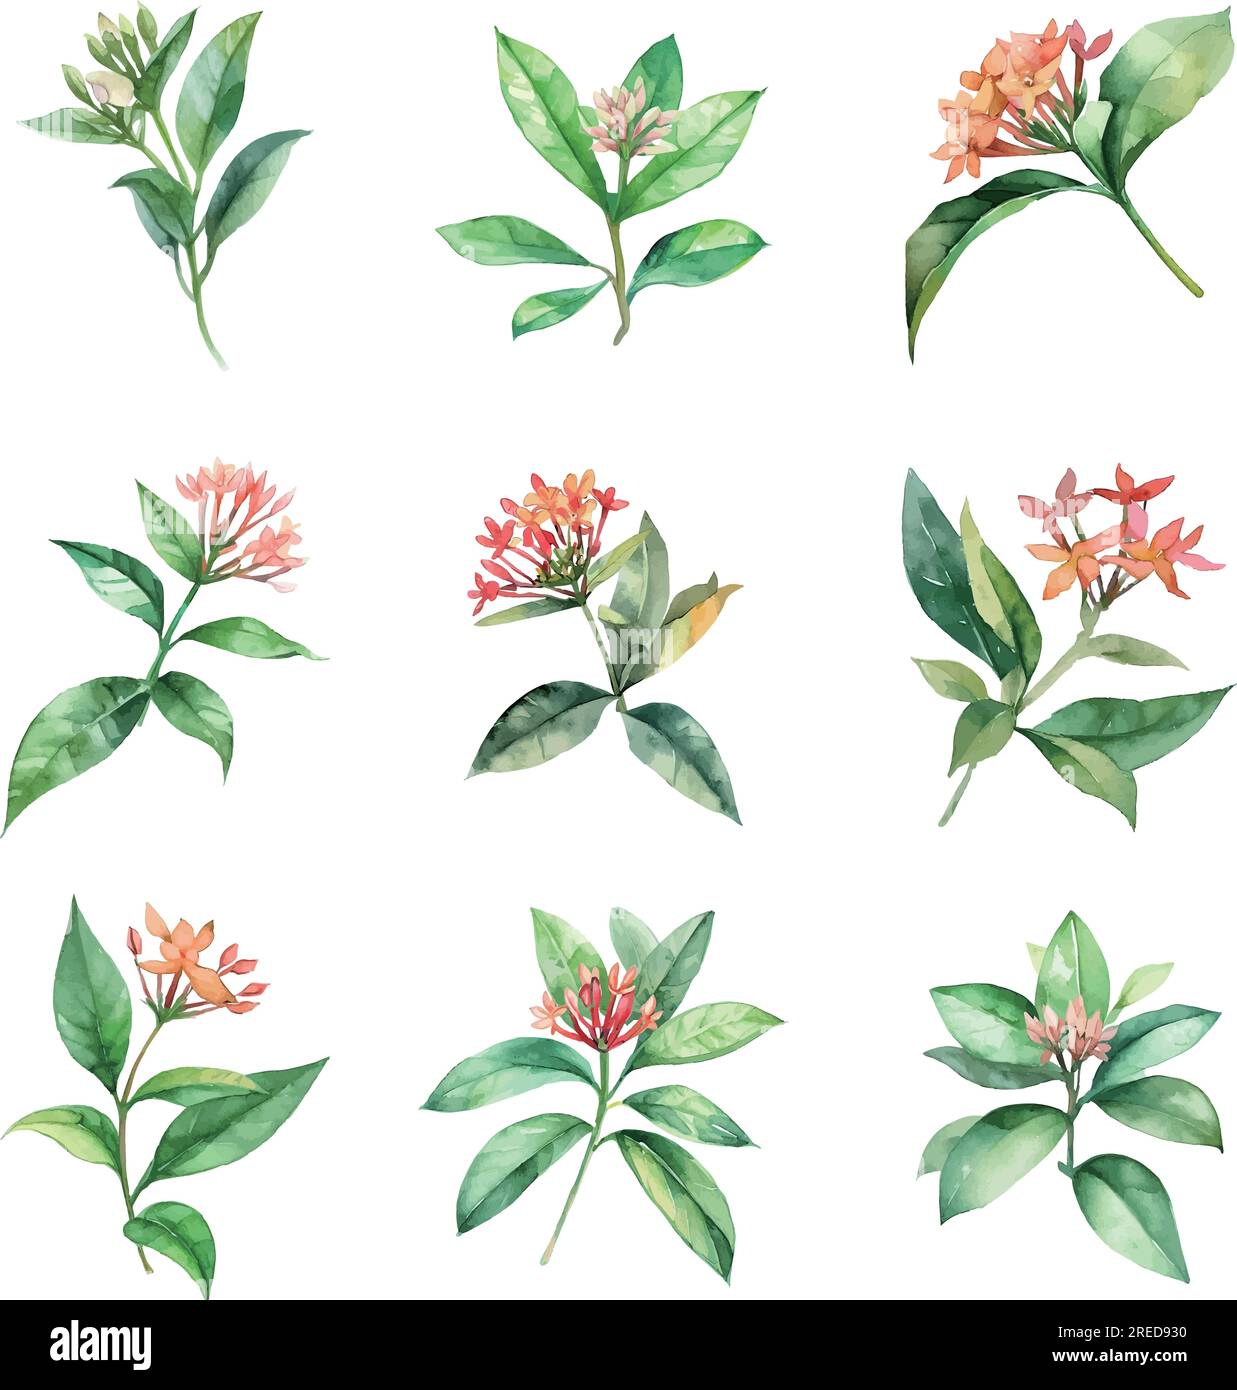 Rubiaceae.Watercolor Ixora flowers set. Hand drawn illustration isolated on white background. Stock Vector